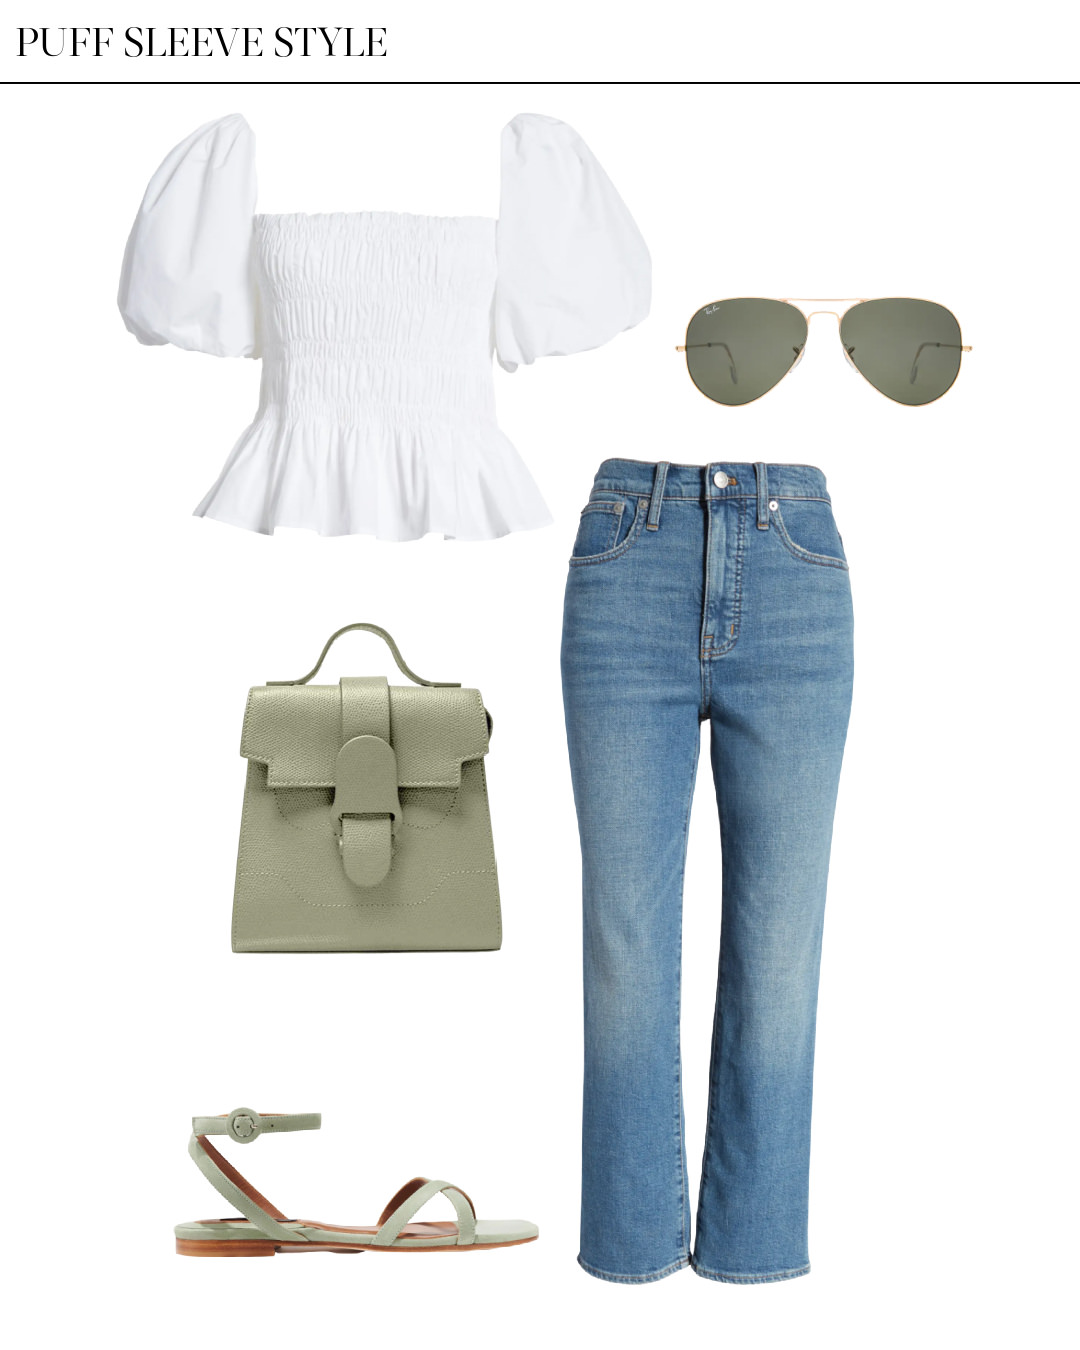 Look: 10 Puff Sleeve Top Outfit Ideas